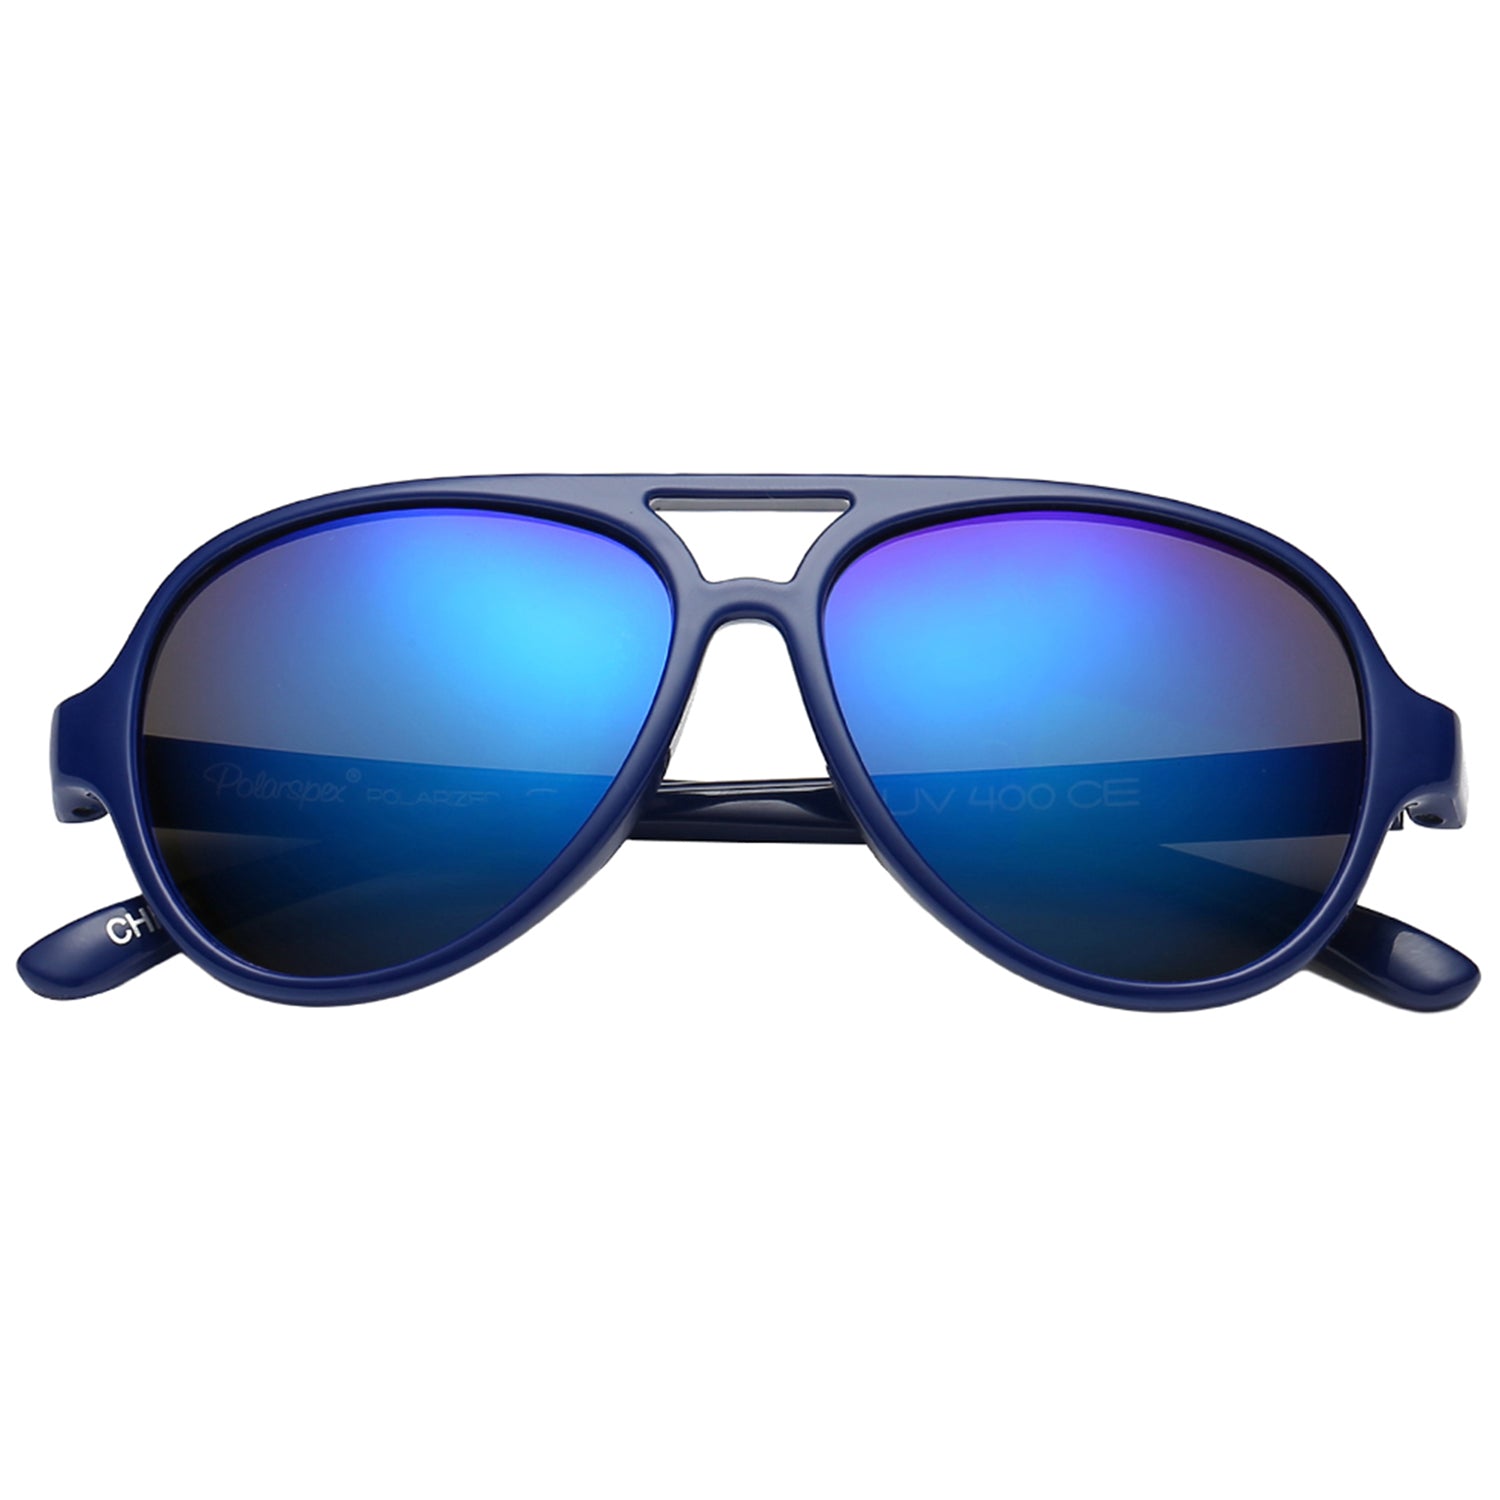 Polarspex Polarized Bendable Aviator Pilot Sunglasses with Royal Blue Frames and Polarized Ice Blue Lenses for Boys and Girls (Ages 2 - 8)